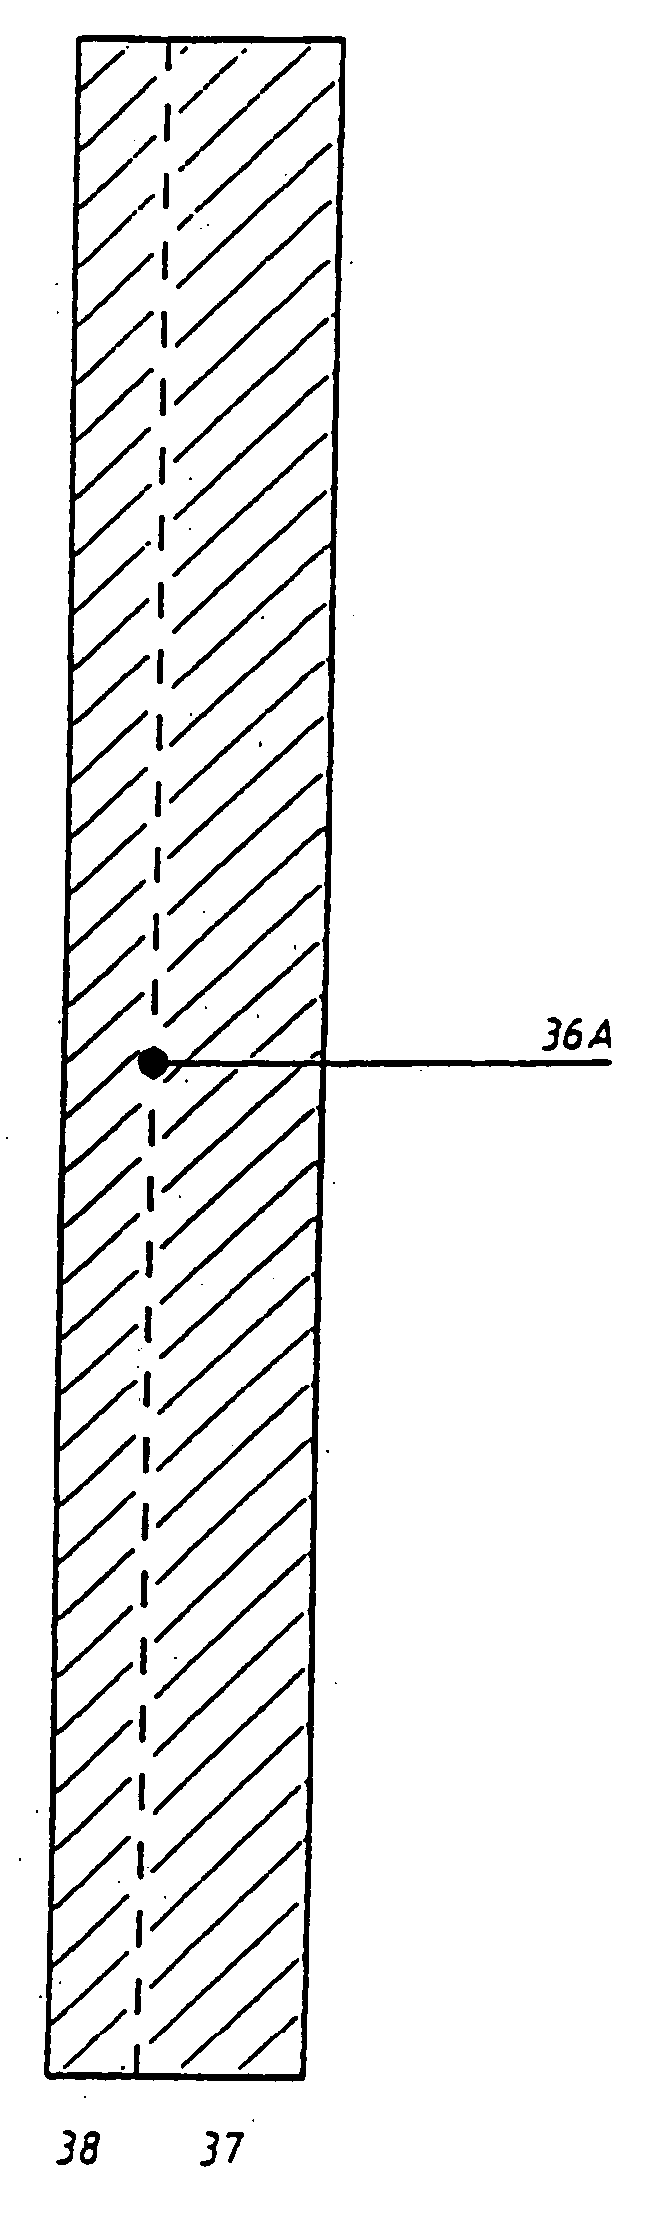 Composite filter and method of making the same